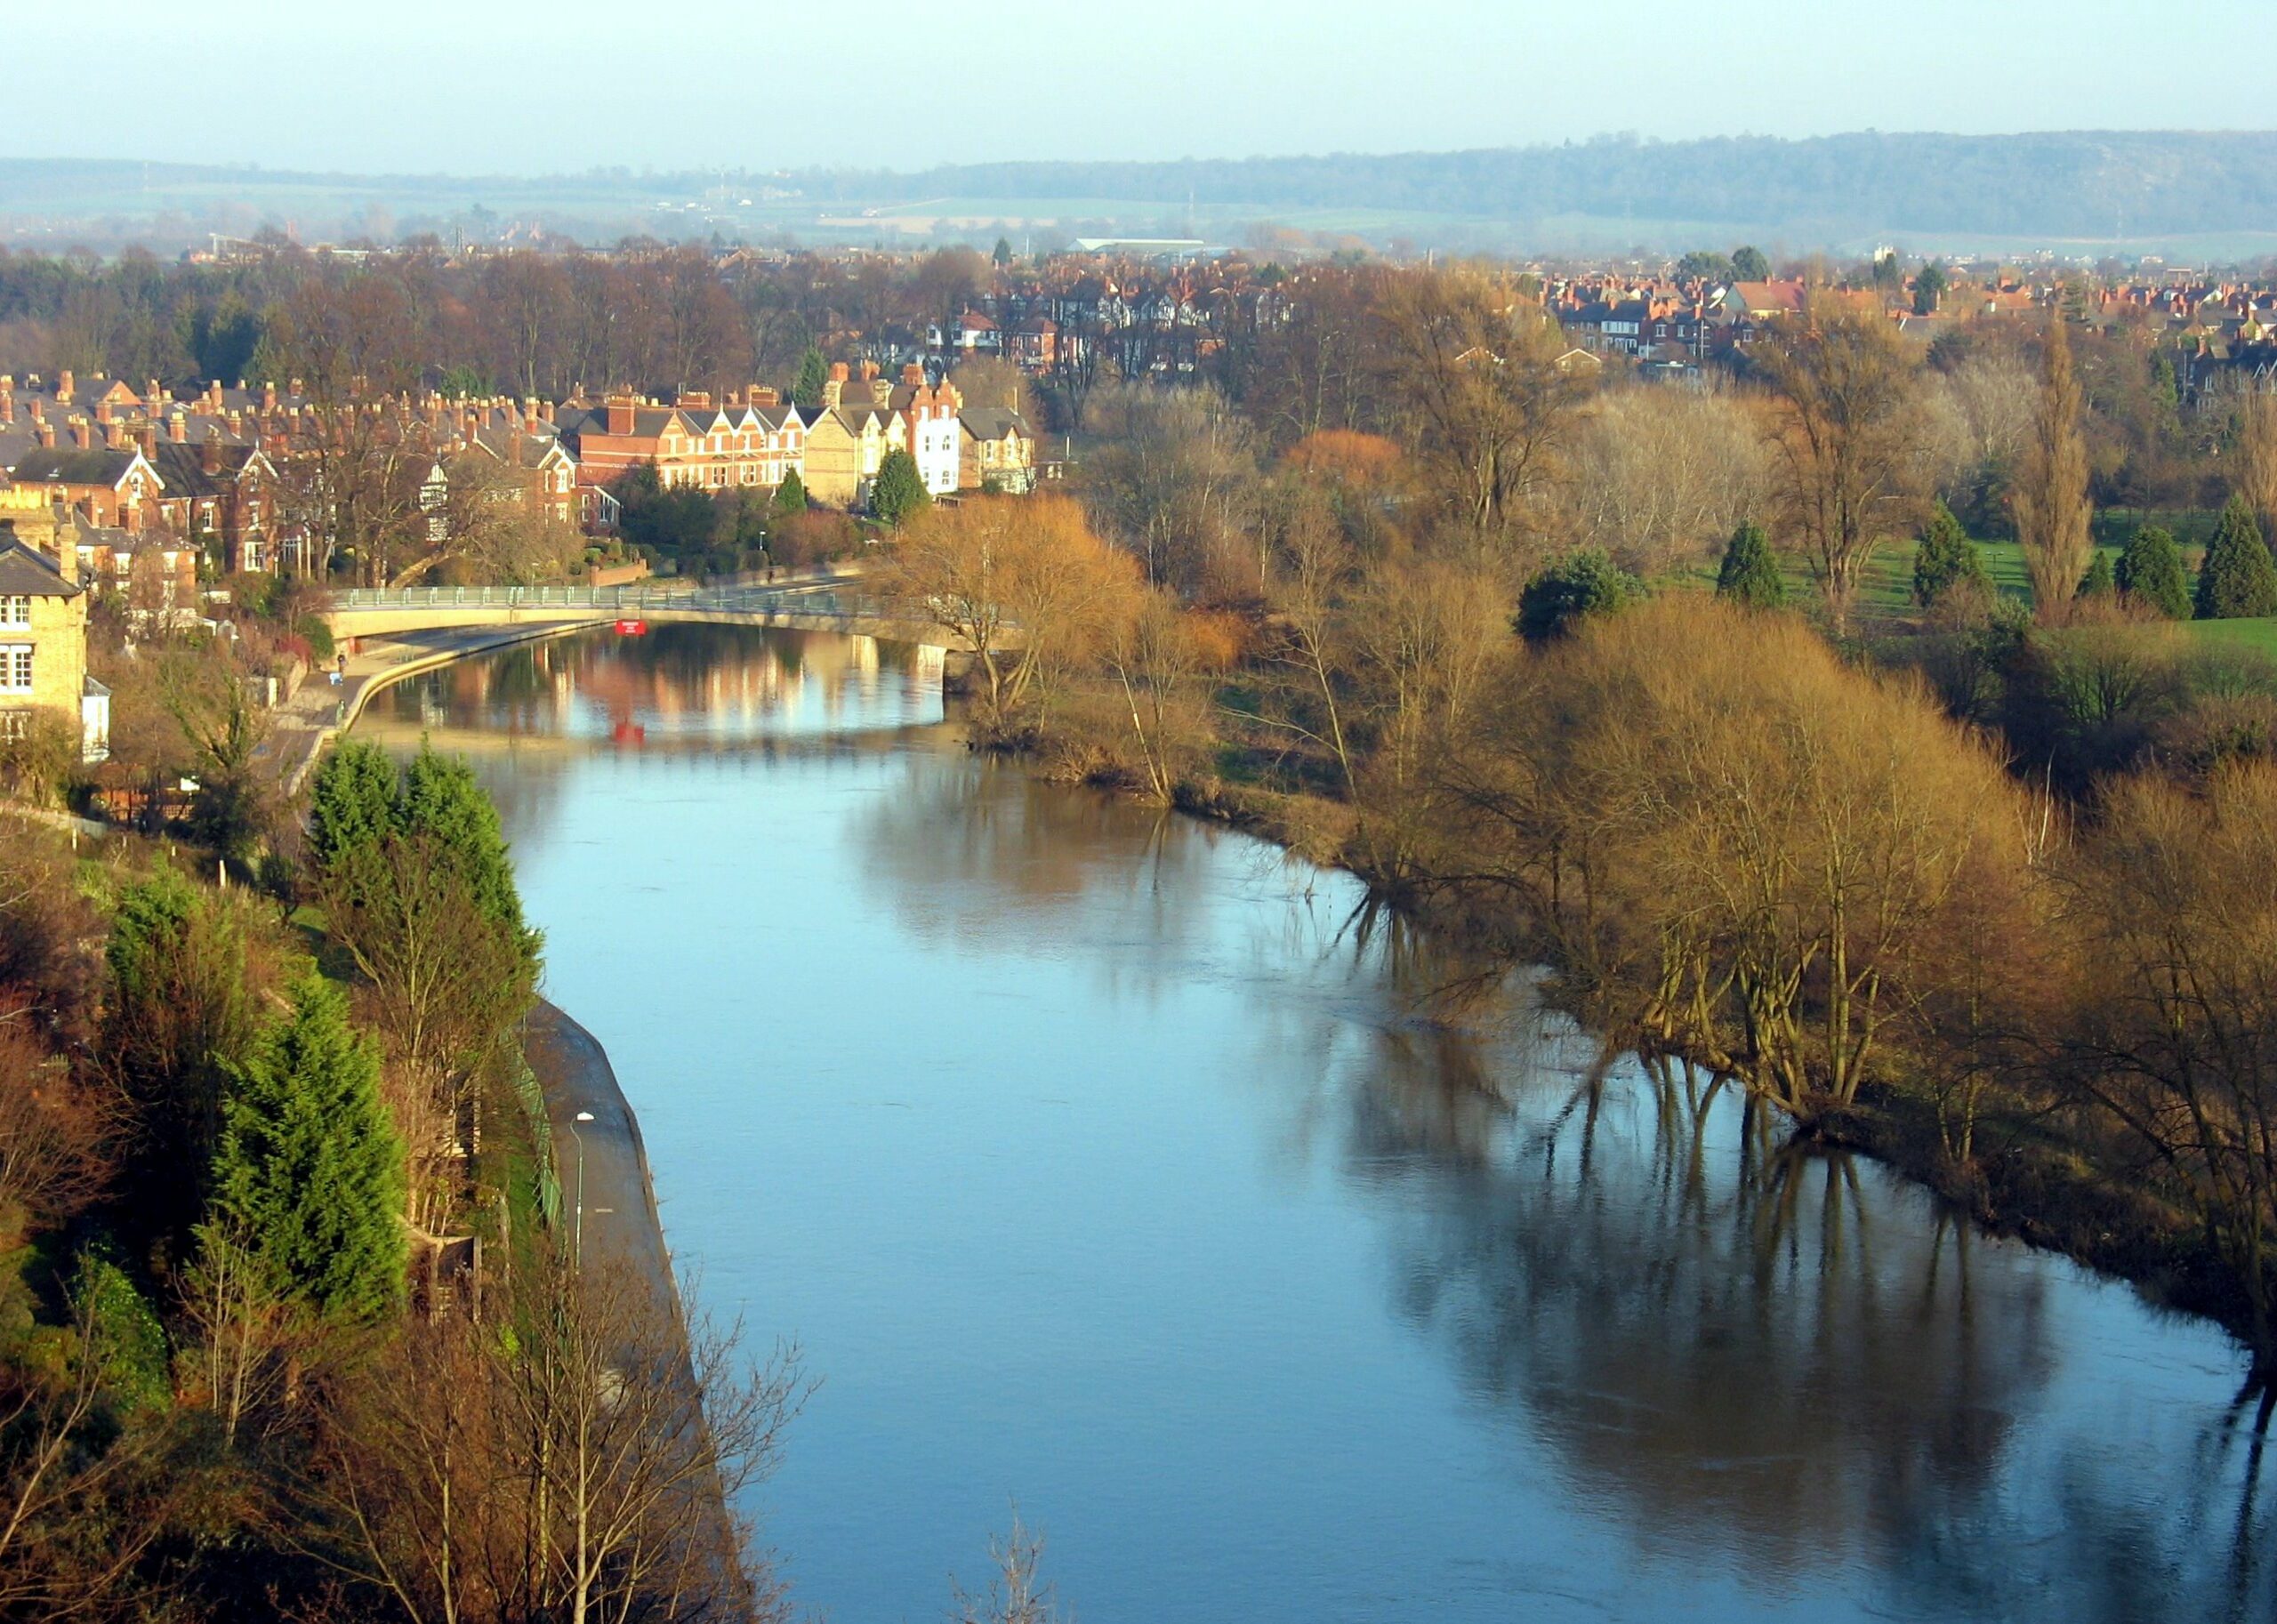 A shot of the river Severn with a bridge crossing it